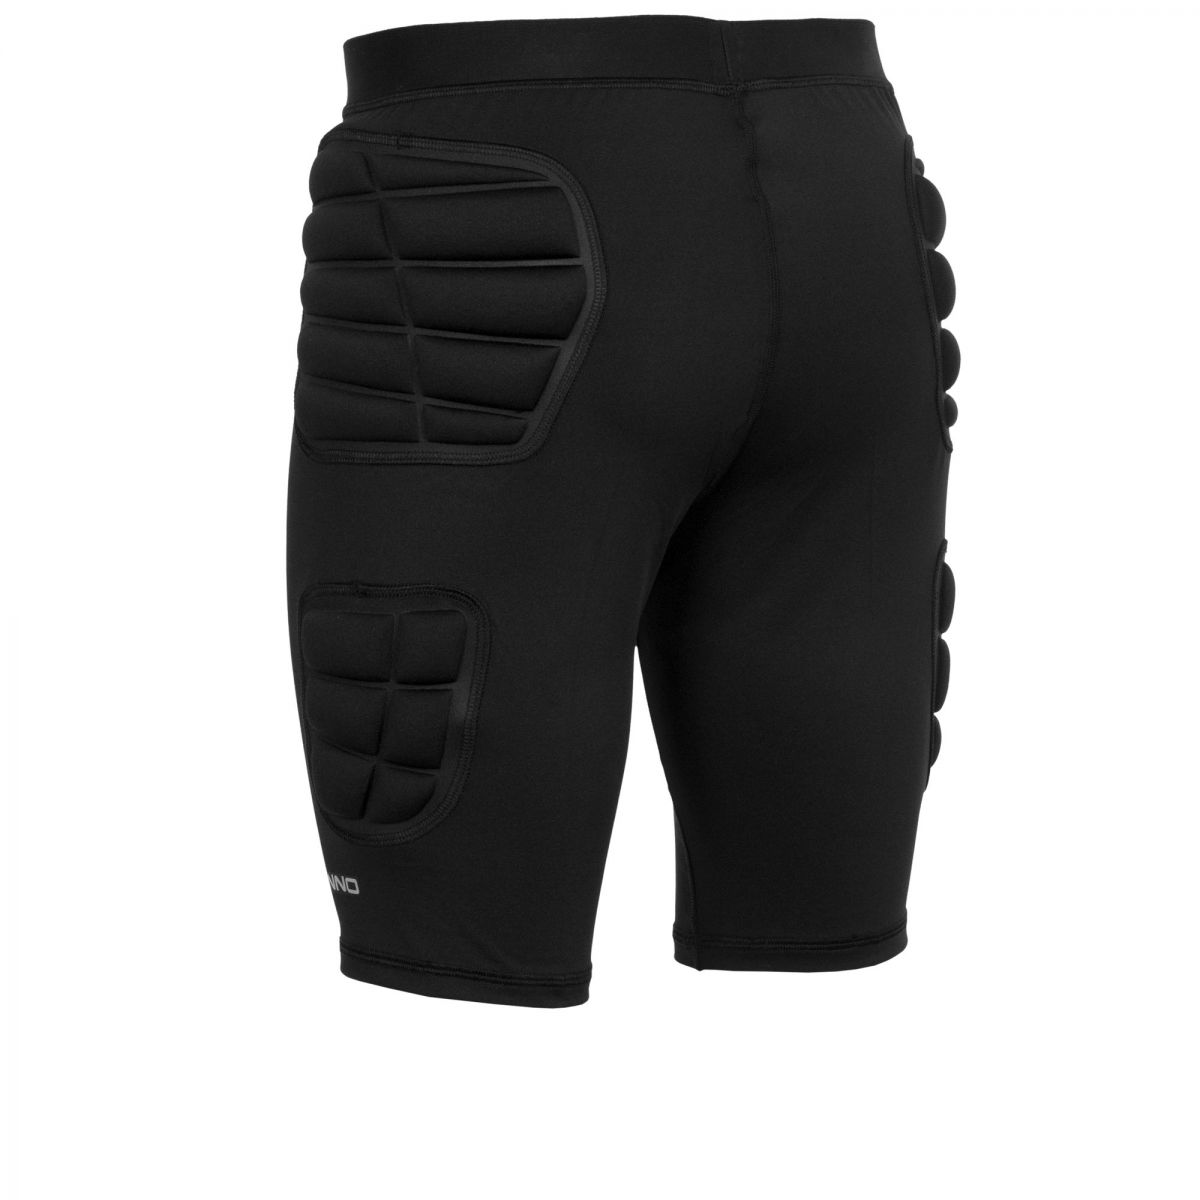 OBK Protection Short